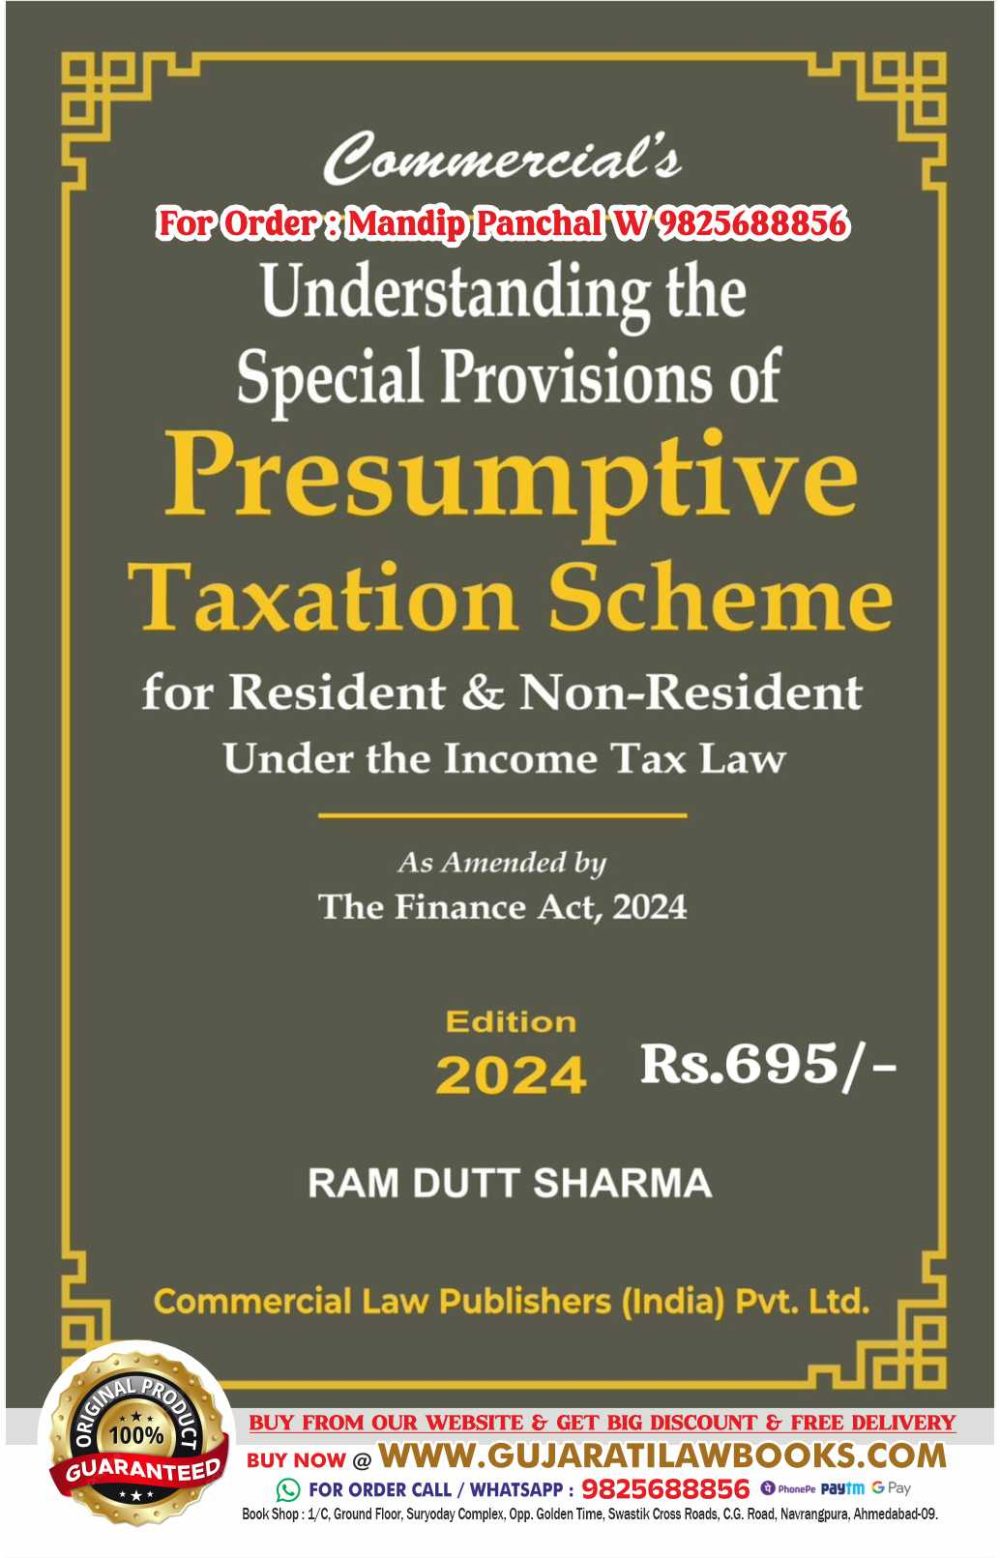 Understanding the Special Provisions of PRESUMPTIVE TAXATION SCHEME for Resident & NRI Non Resident - by Ram Dutt Sharma - Latest April 2024 Edition Commercial